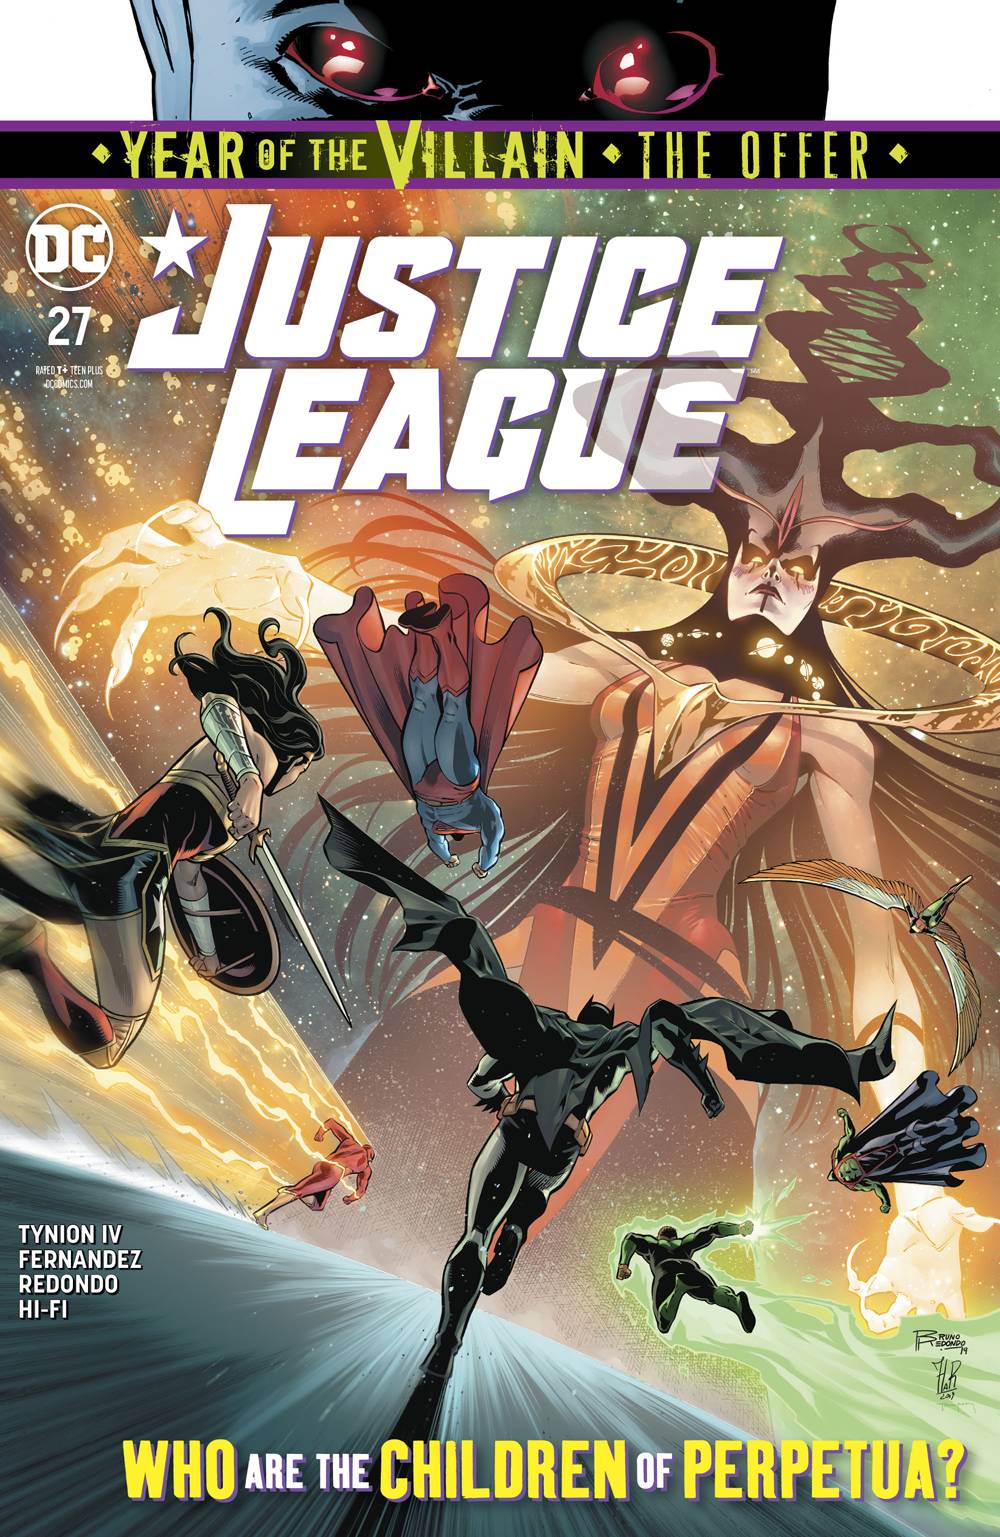 Justice League #27 - State of Comics